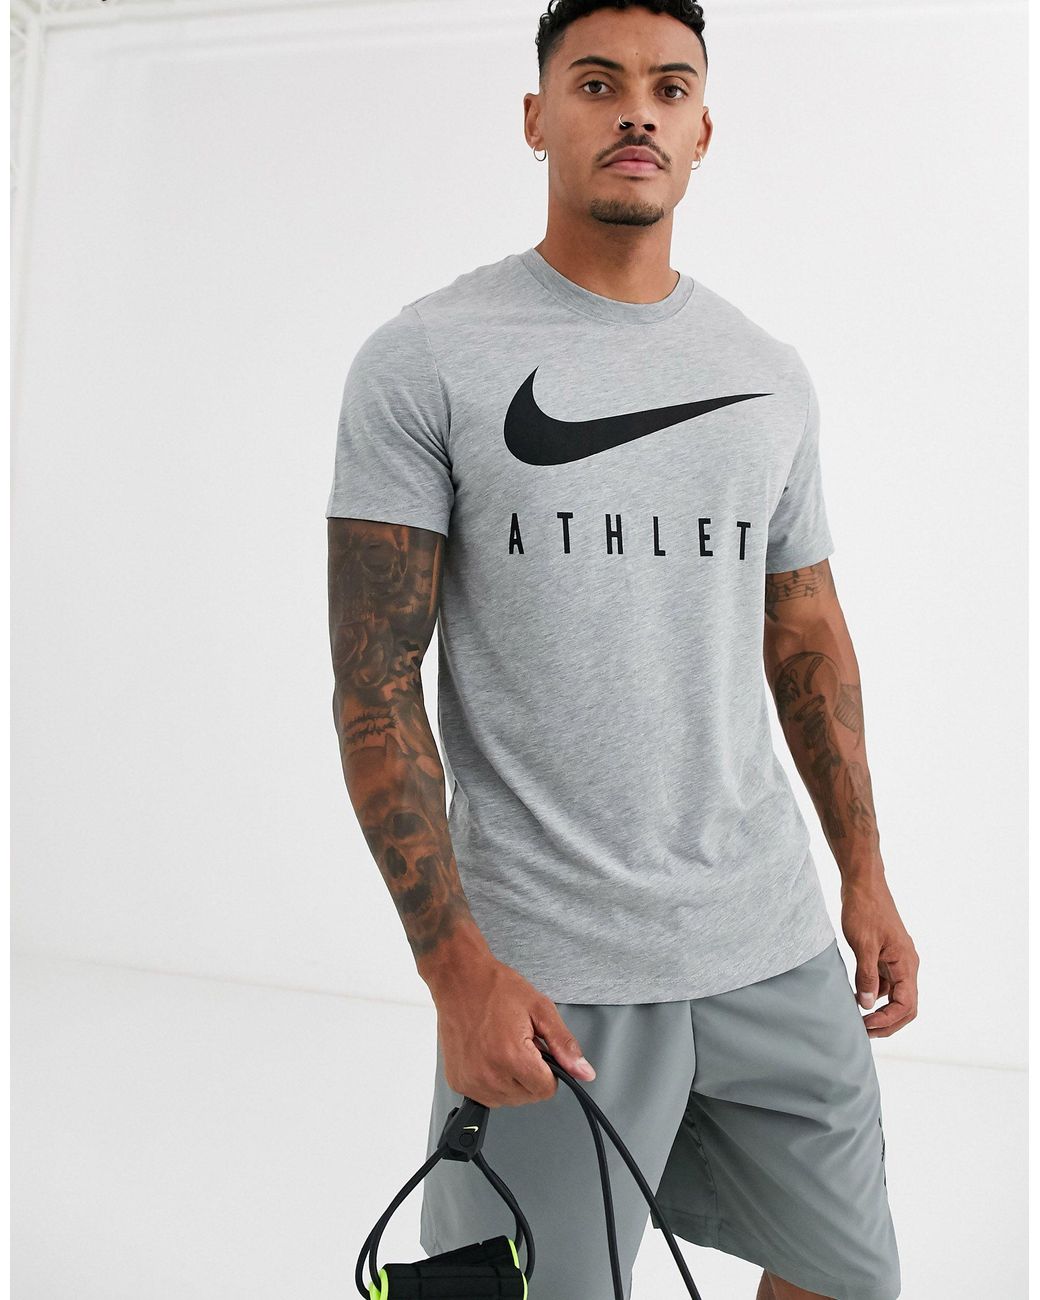 Nike Athlete T-shirt in Grey for Men | Lyst Canada